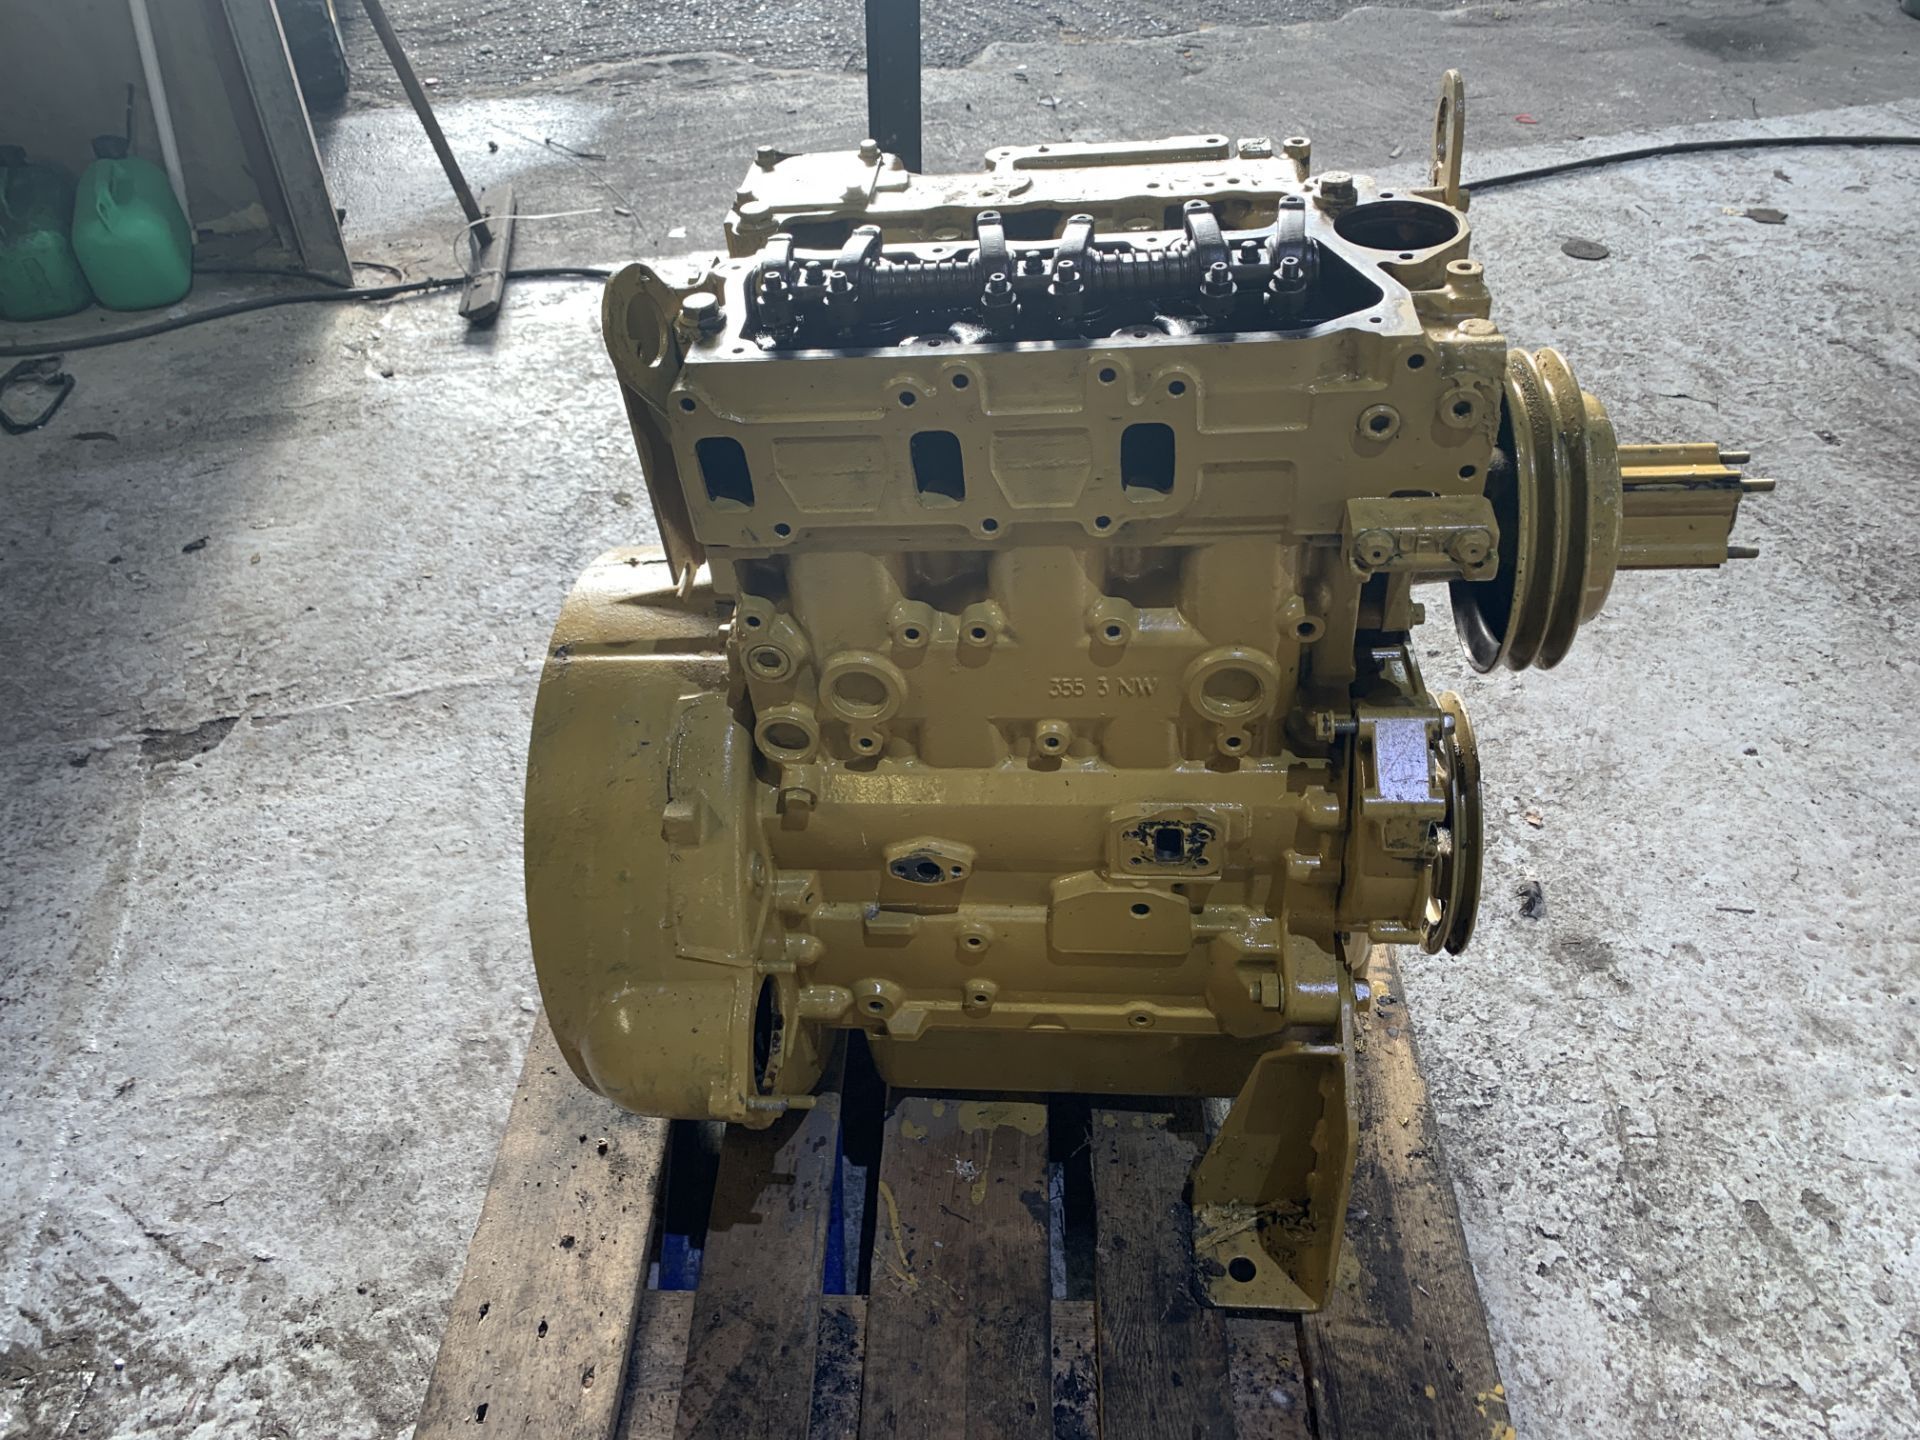 CATEPILLAR S3.3 G4 G DRIVE GENERATOR, Serial Number:*E3G07532* RESERVE REDUCED!! *PLUS VAT* - Image 13 of 13